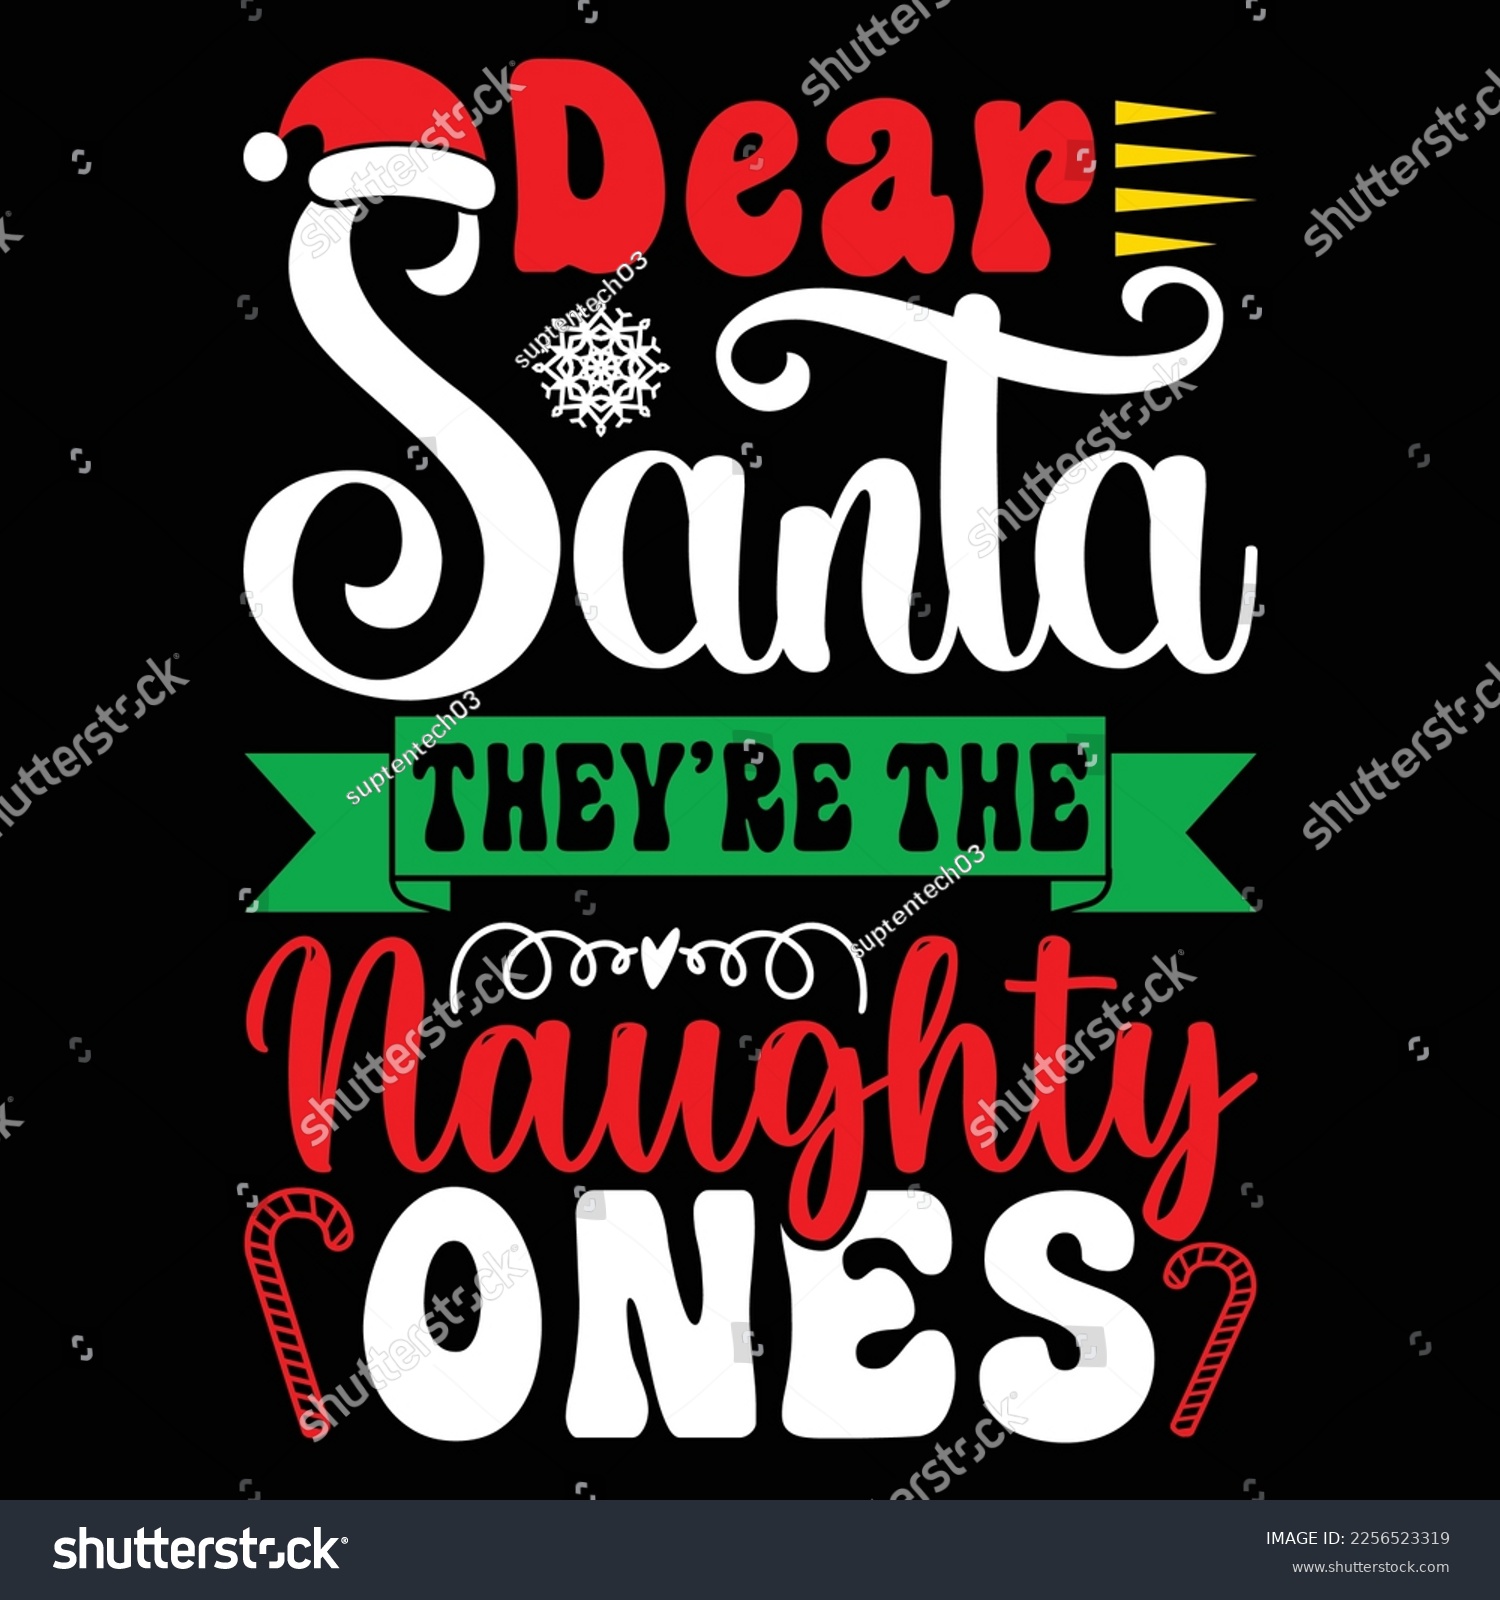 SVG of Dear Santa They're The Naughty Ones, Merry Christmas shirts Print Template, Xmas Ugly Snow Santa Clouse New Year Holiday Candy Santa Hat vector illustration for Christmas hand lettered svg